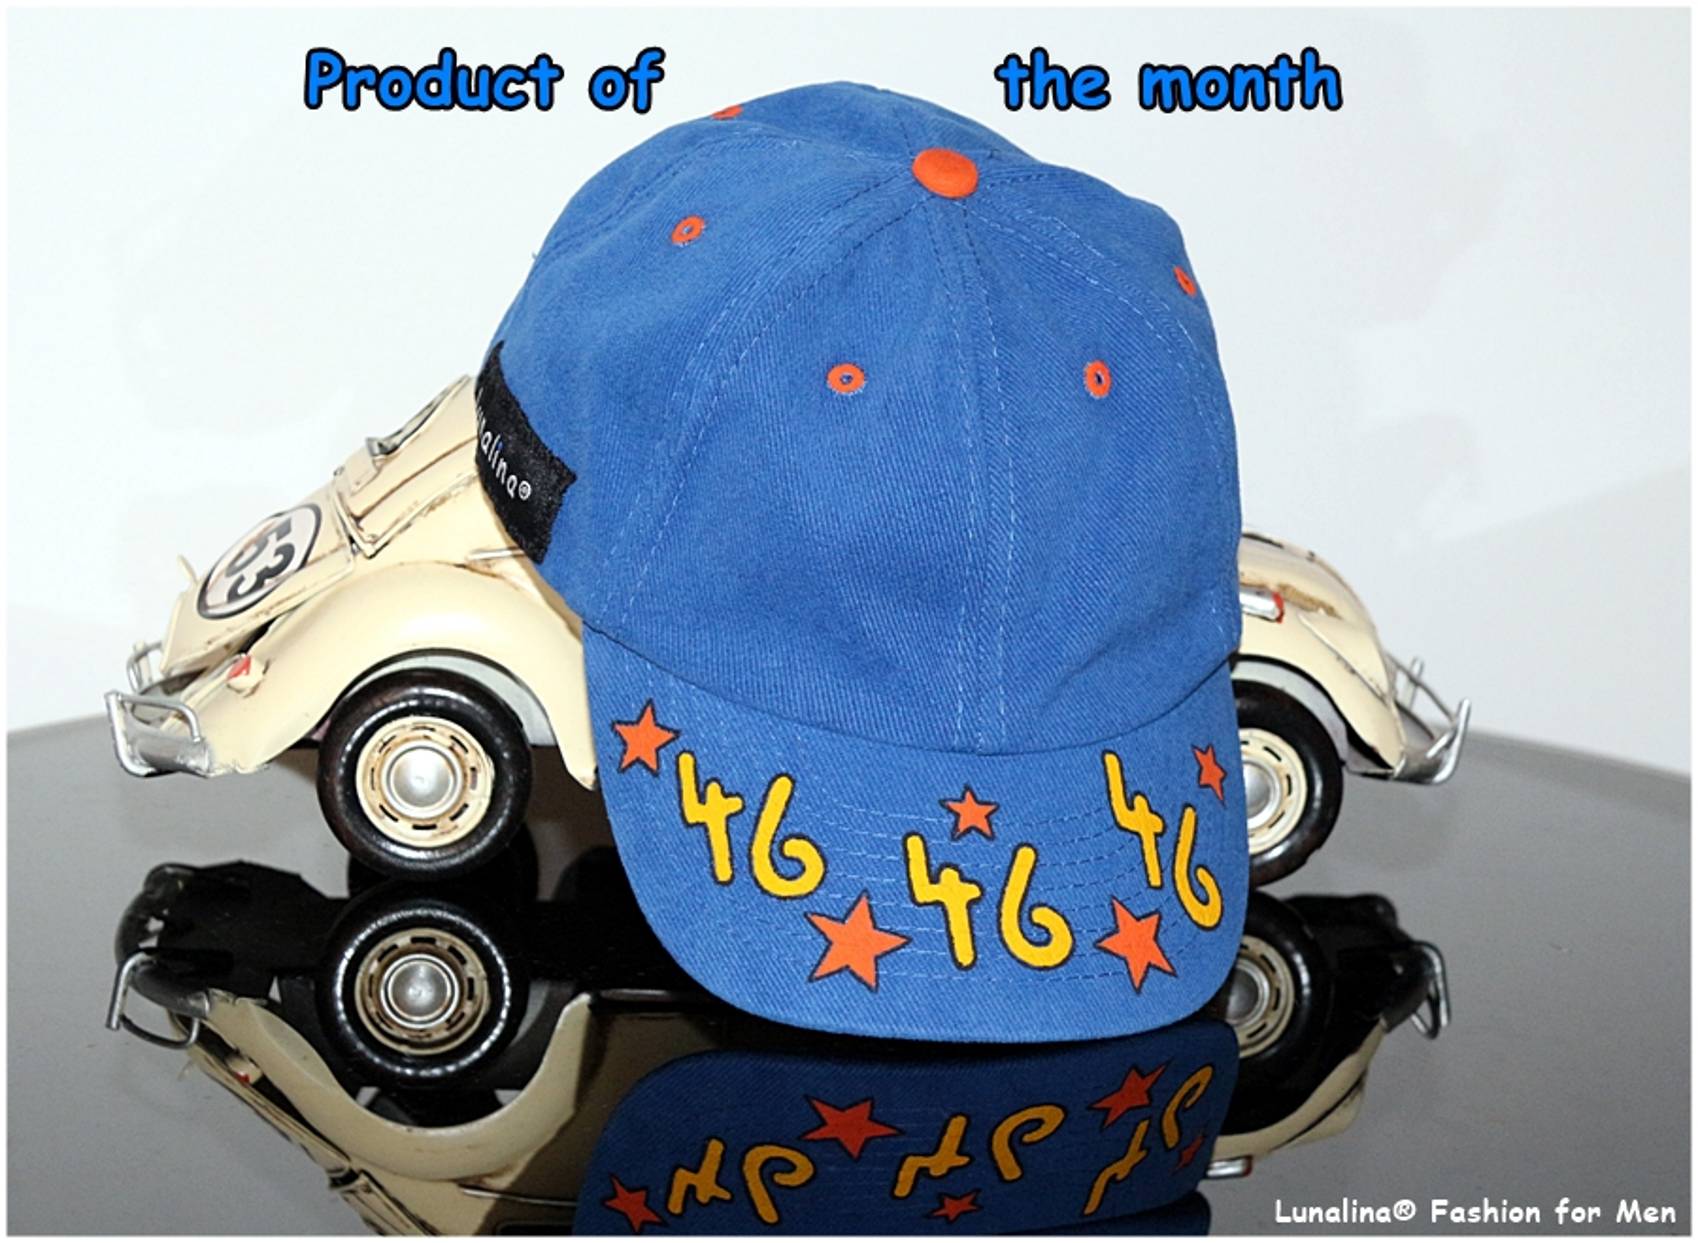 Be the lucky One who get the “Product of the month” 25% reductio